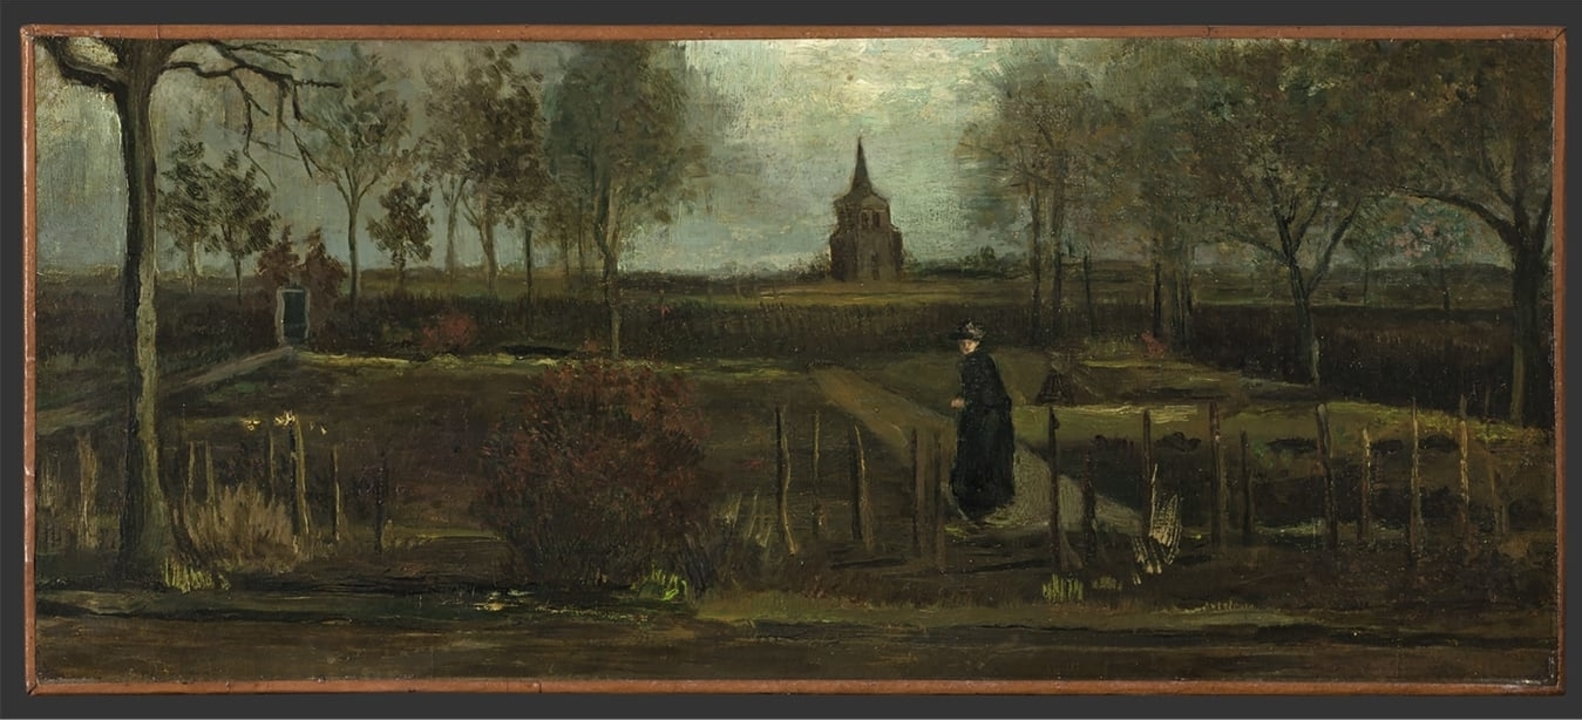 ILLUSTRATION: Dutch painter Vincent Van Gogh's The Parsonage Garden at Nuenen depicting a woman standing in a sparse garden landscape. https://commons.wikimedia.org/wiki/File:Van_Gogh_-_The_Parsonage_Garden_at_Nuenen.jpg#filelinks